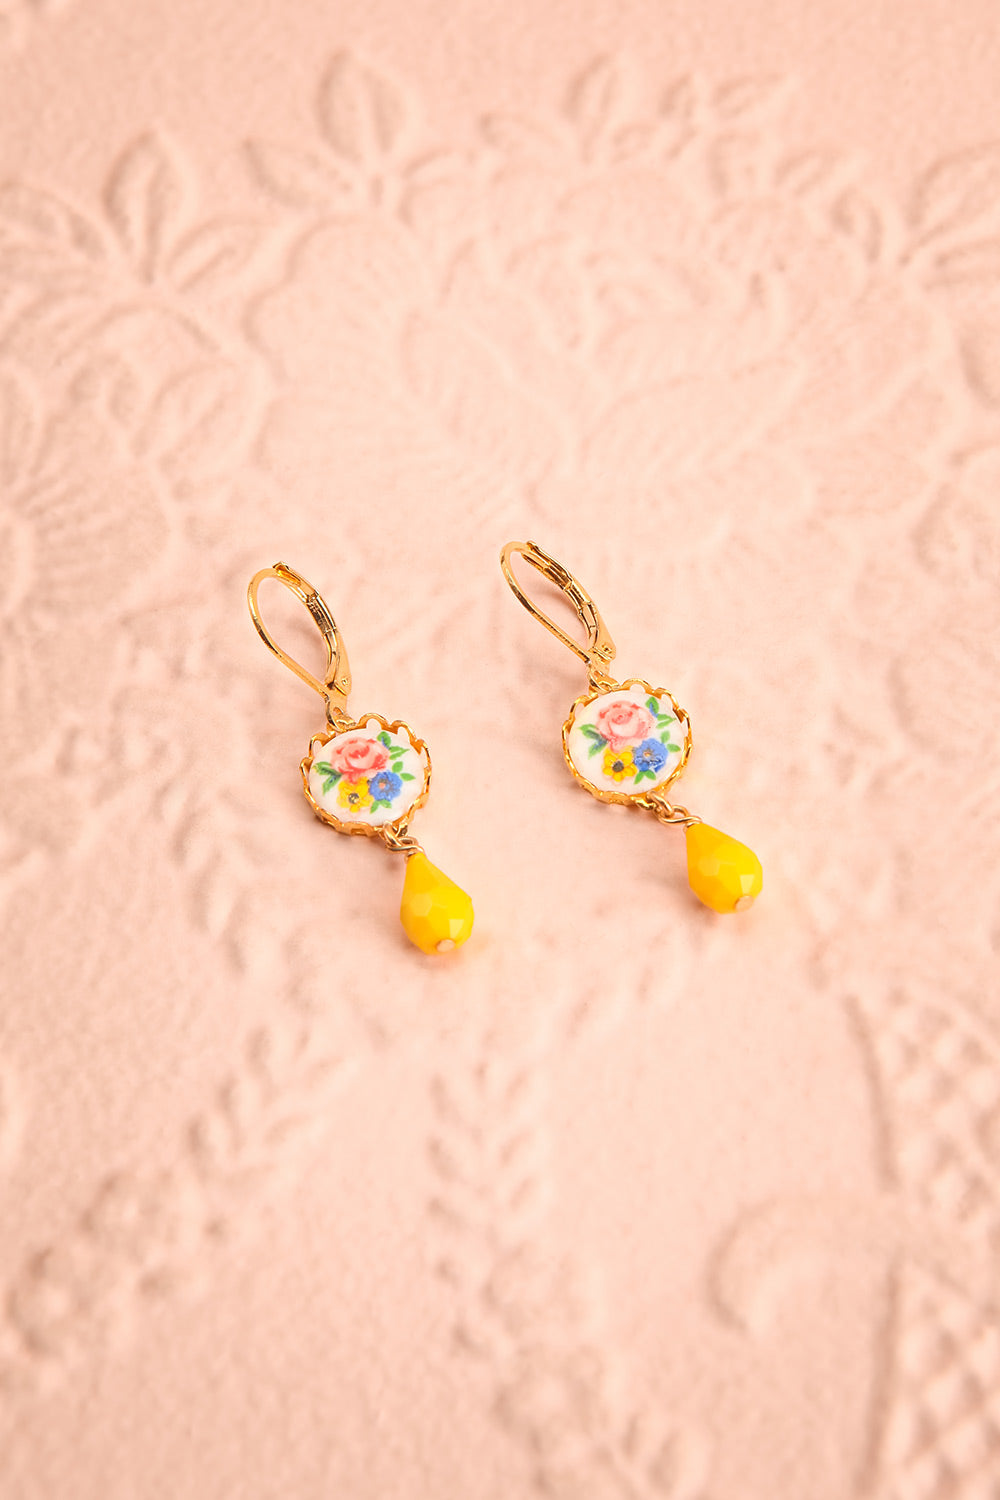 Liza Todd Vintage Inspired Floral Pendant Earrings | Boutique 1861